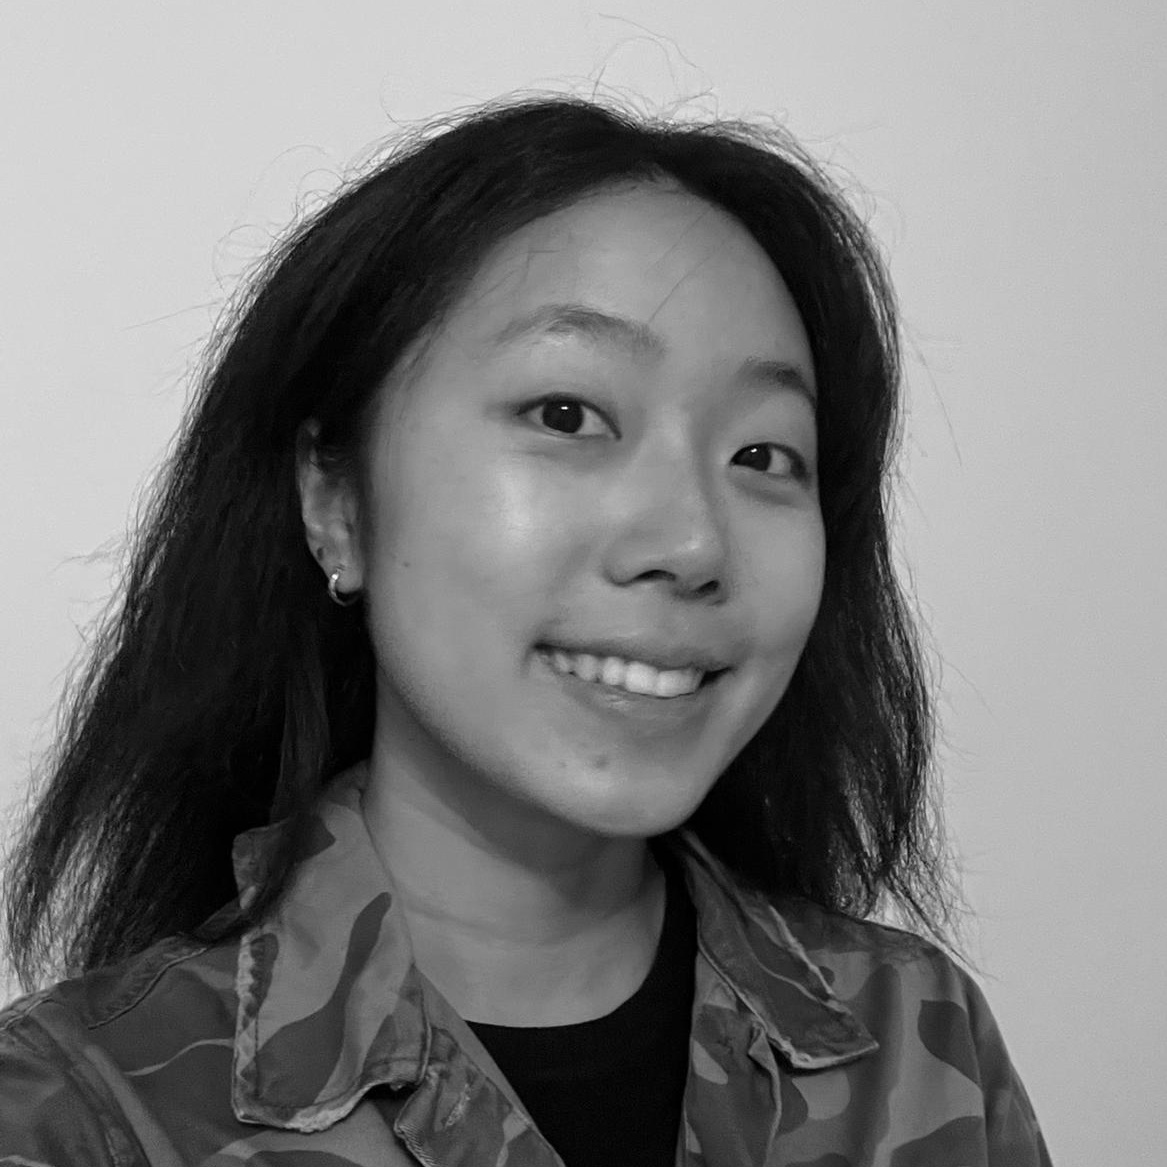 A greyscale image of a smiling person with long dark hair and wearing a camoflage print jacket